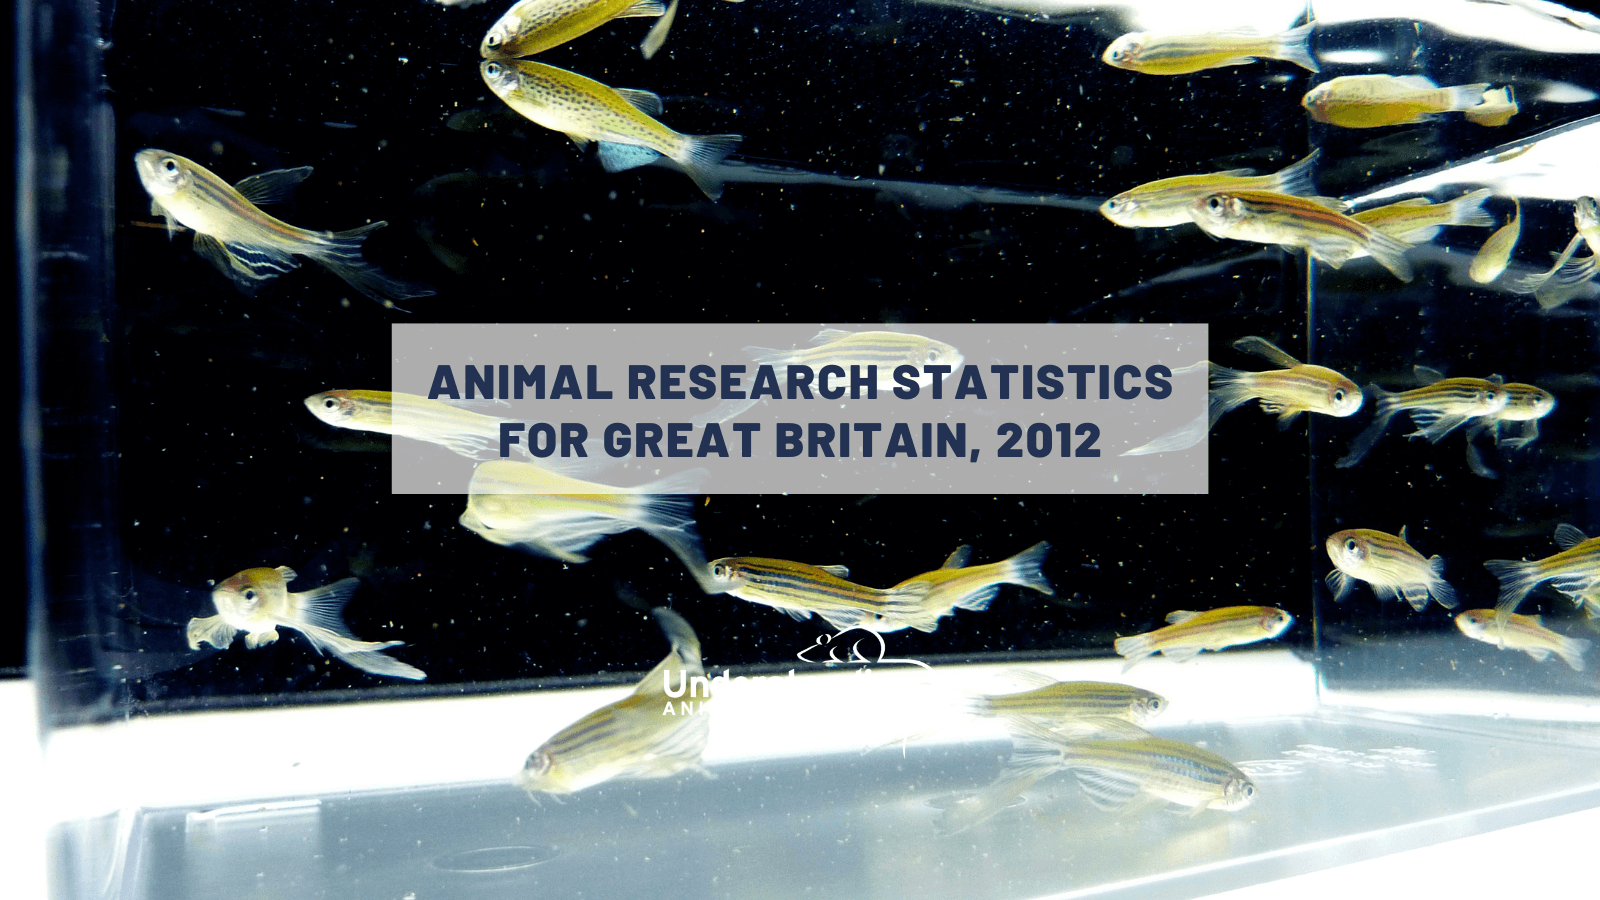 Animal research statistics for Great Britain, 2012